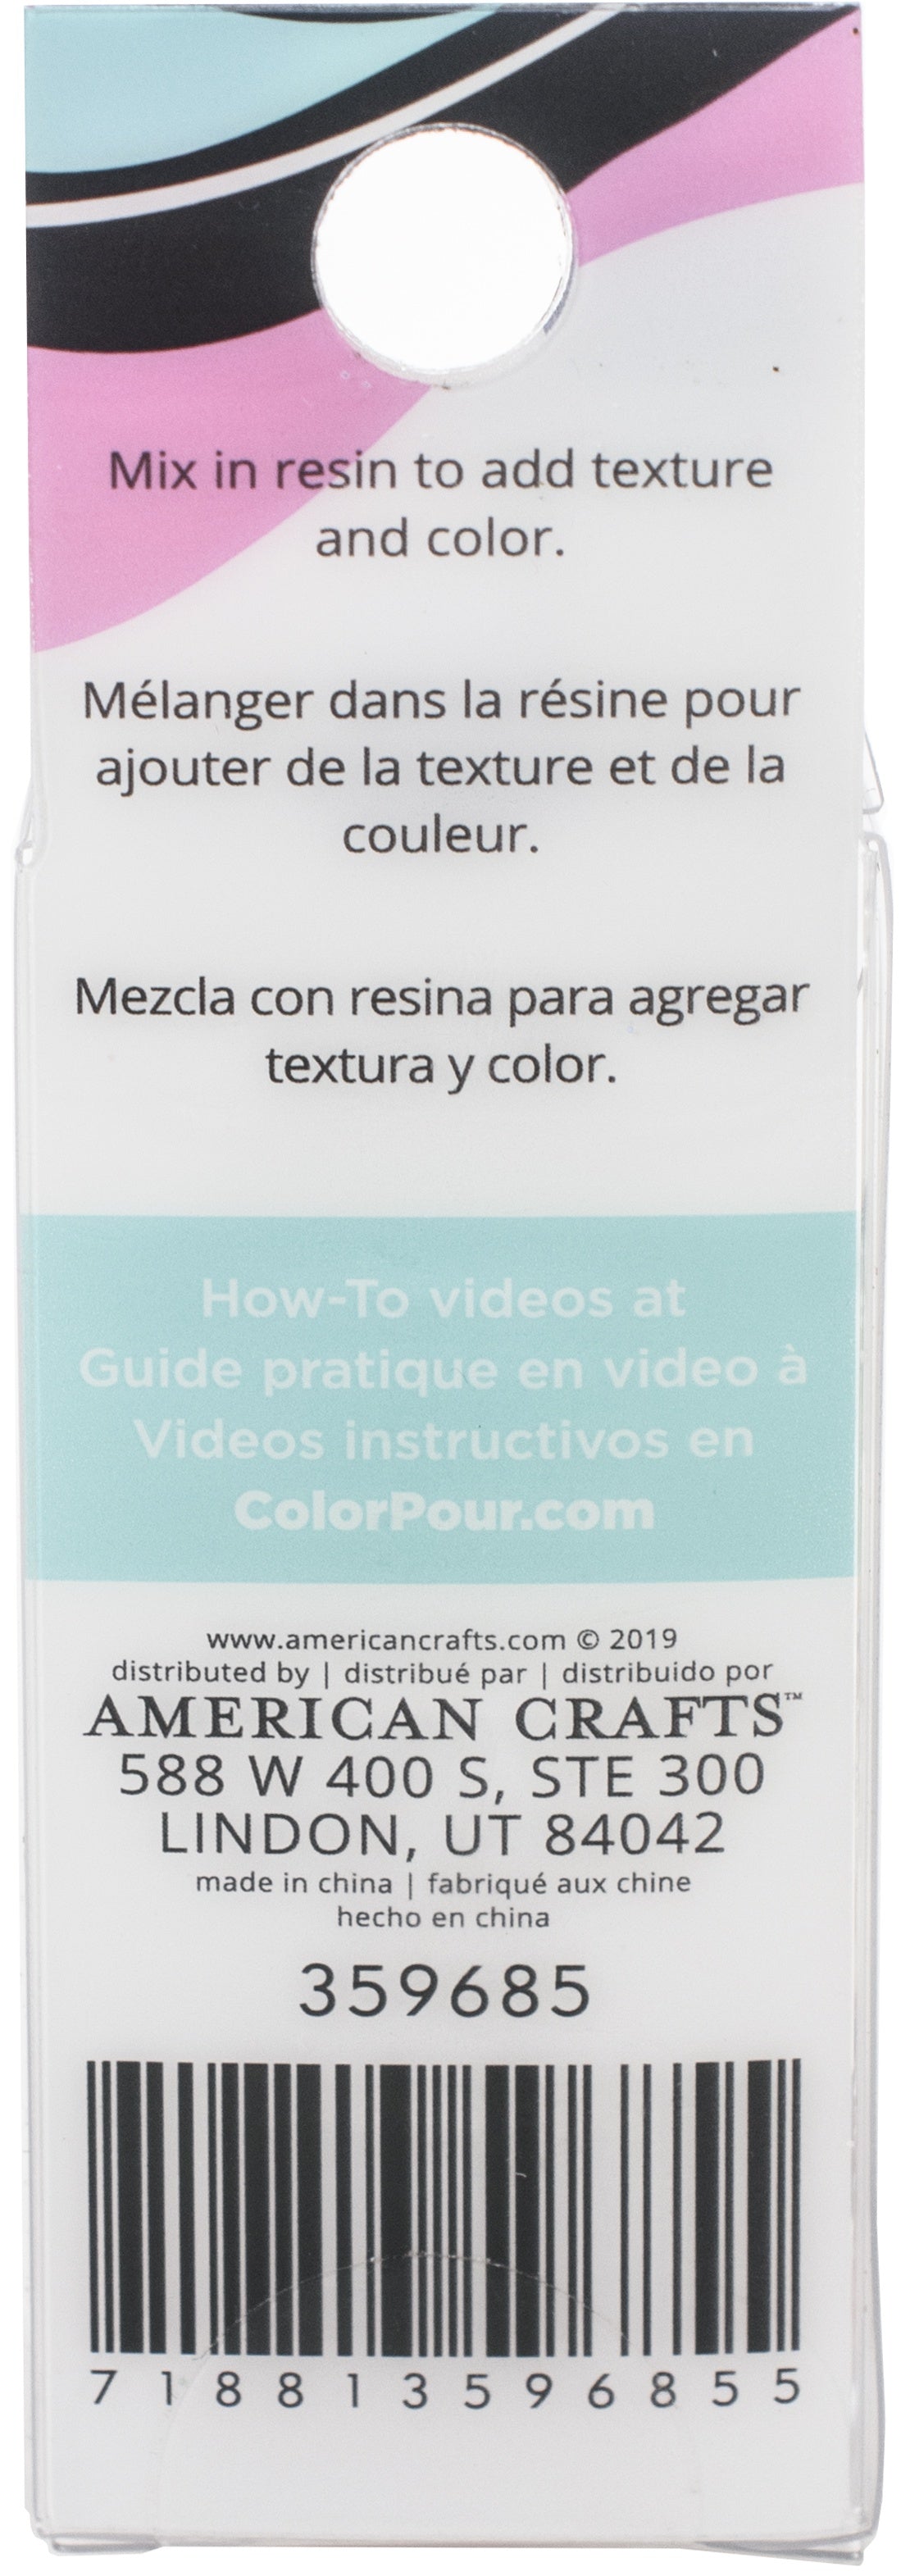 American Crafts Color Pour Resin Mix-Ins-Beads - Colorful 4/Pkg